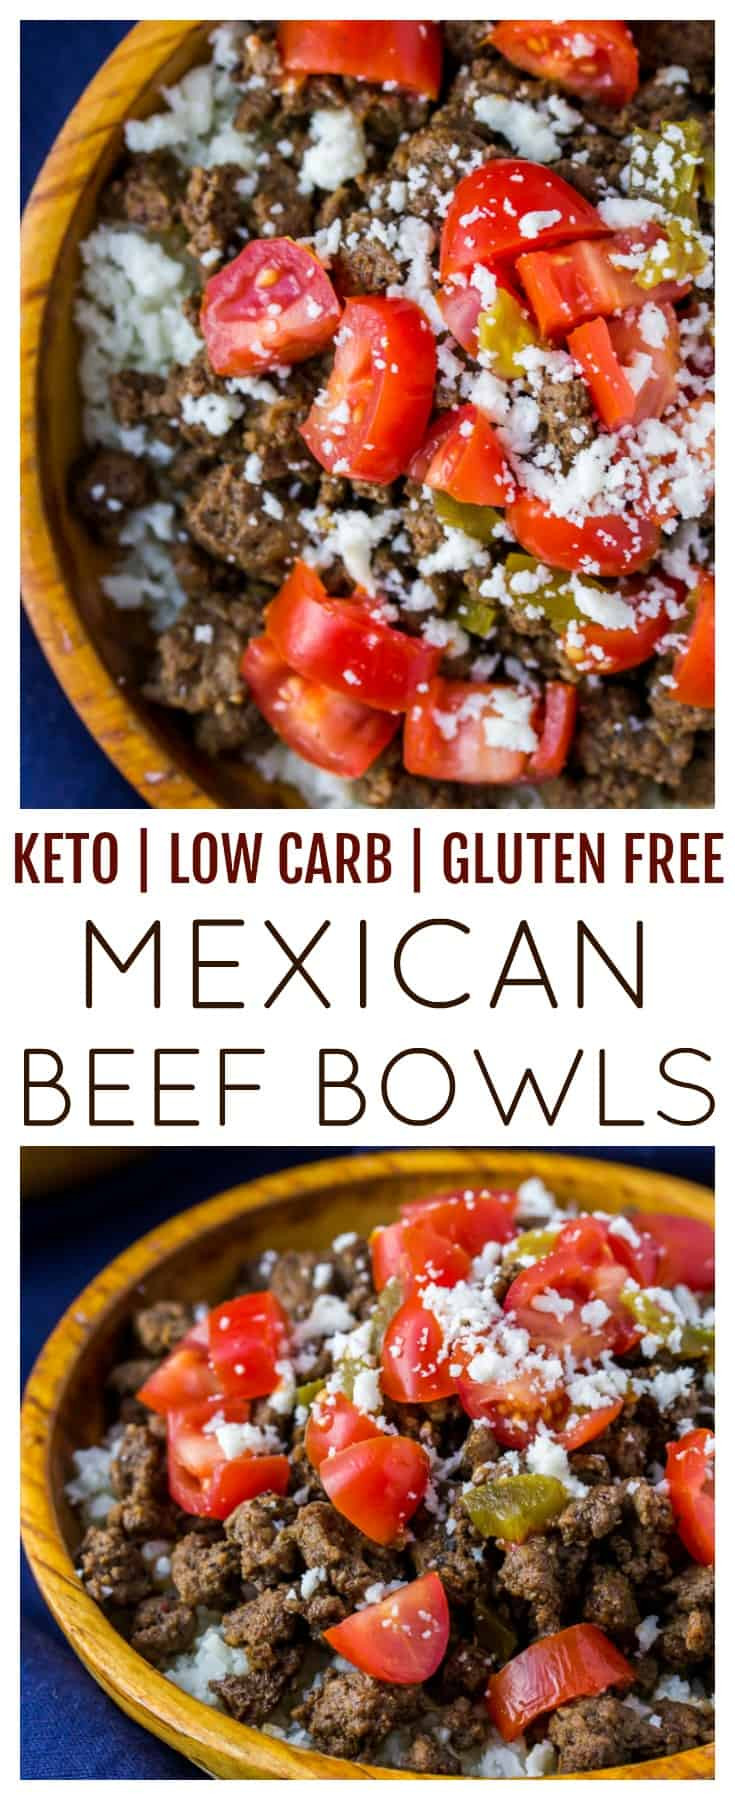 Mexican Keto Bowl
 Keto Mexican Beef Bowls Delicious Little Bites